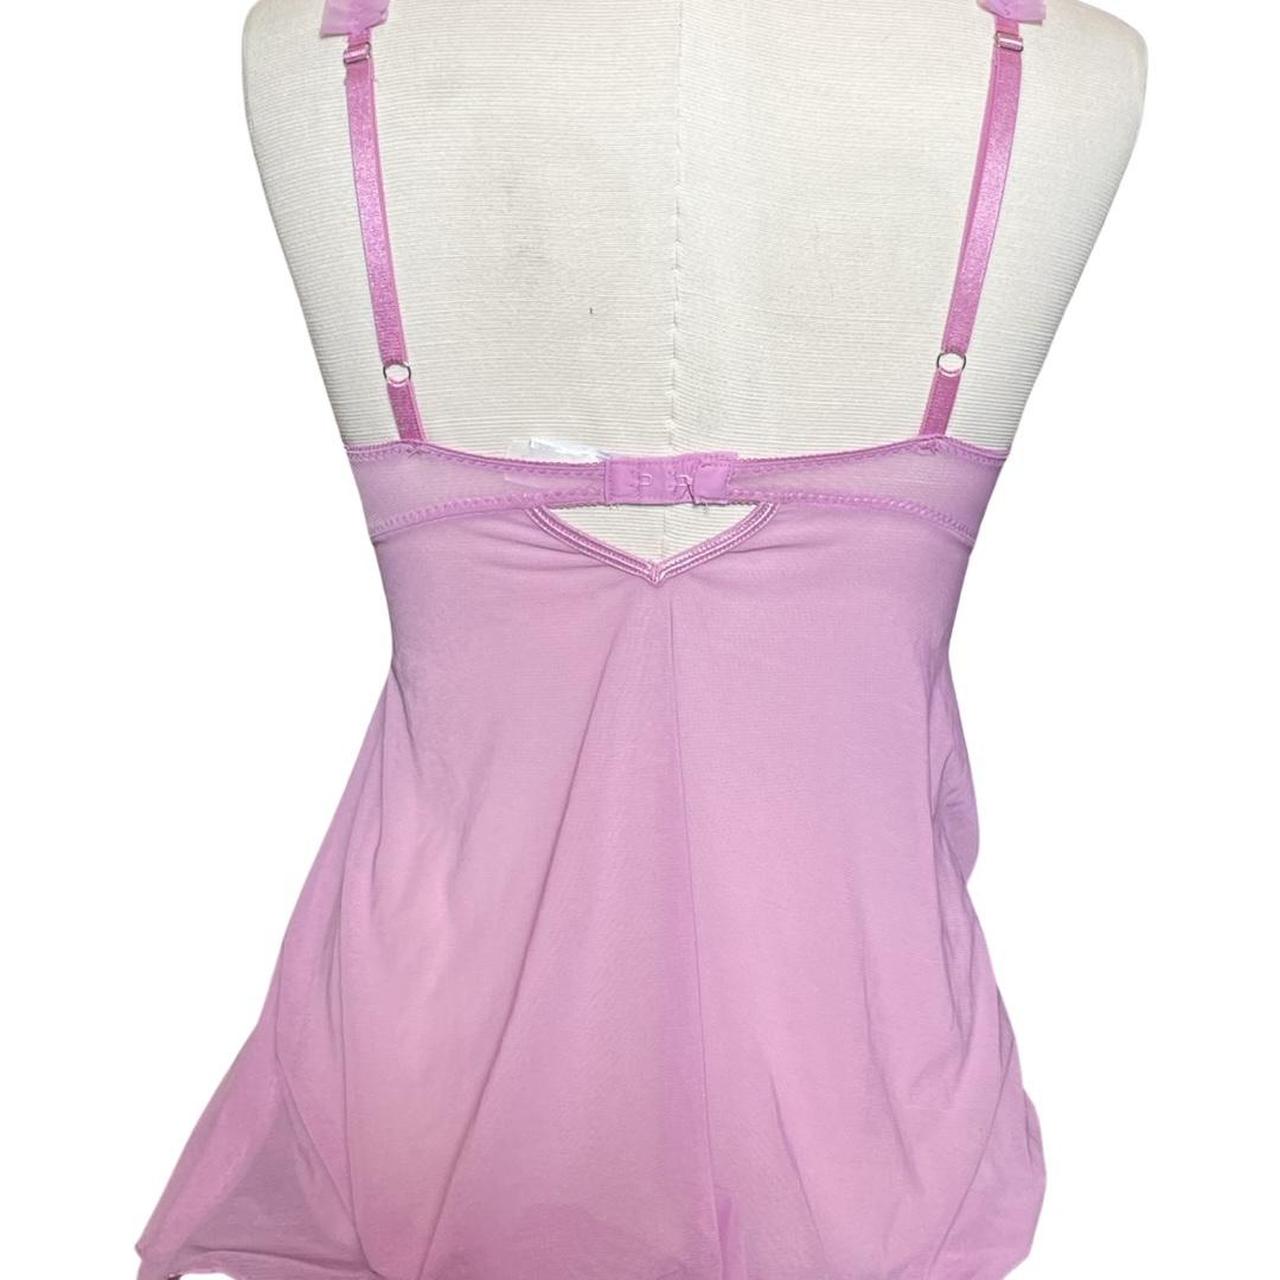 Frederick's of Hollywood Women's Pink and Black Nightwear (2)